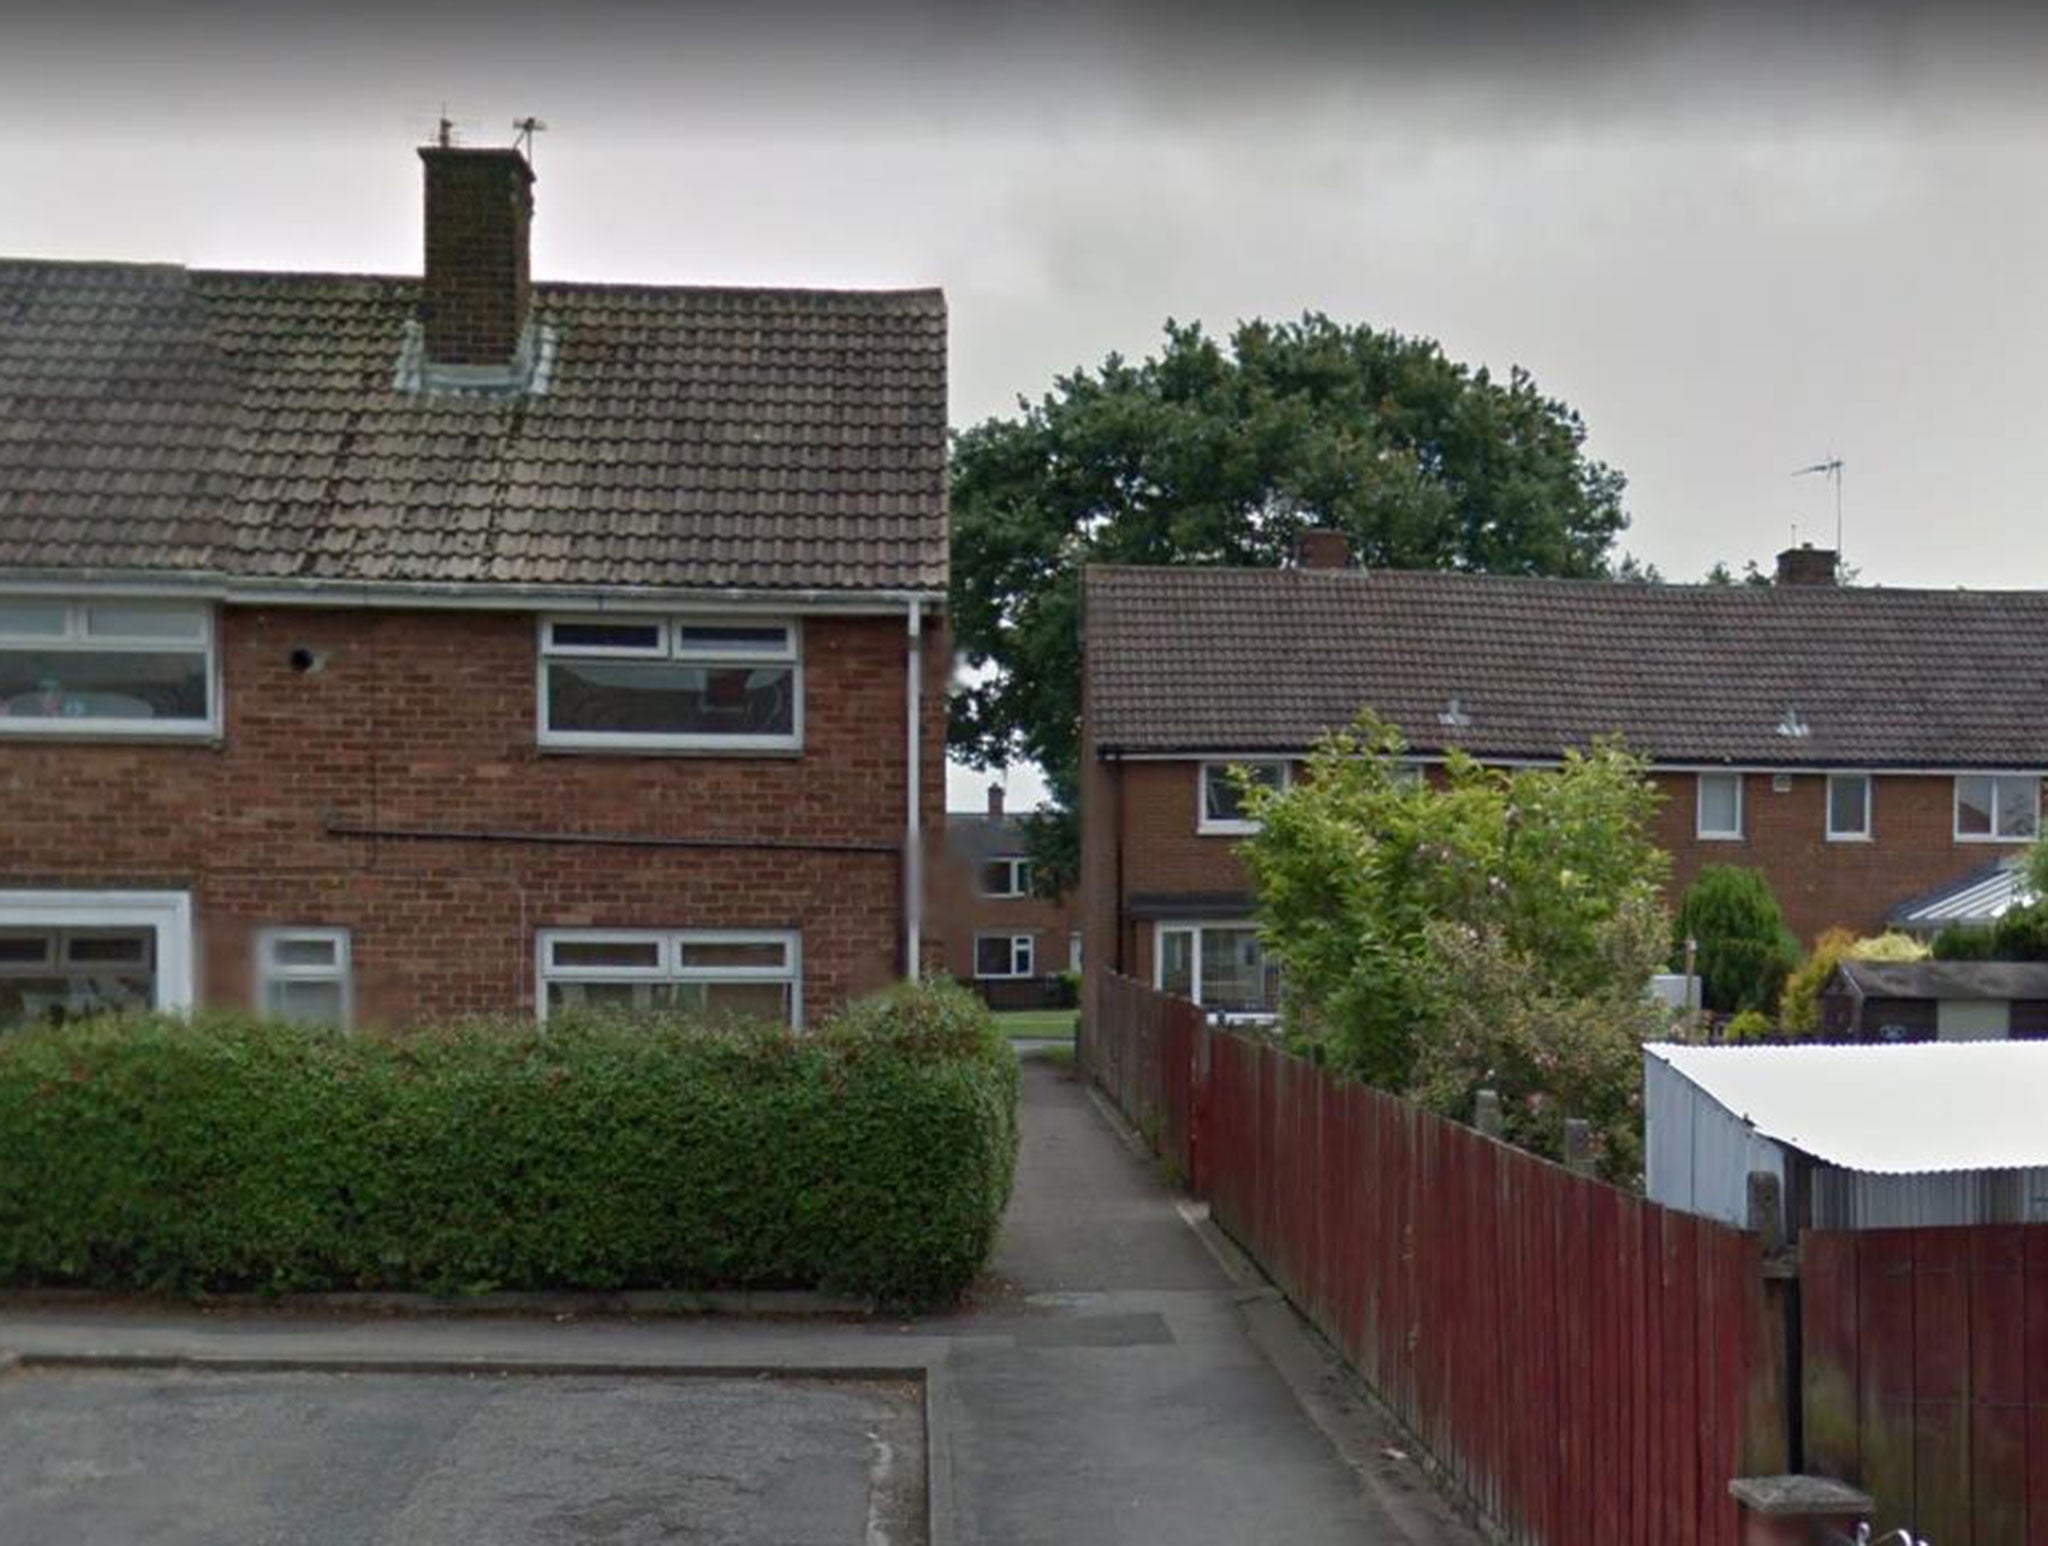 The attack happened as the victim was walking through an alleyway from Stephenson Way towards Wright Close in Newton Aycliffe.